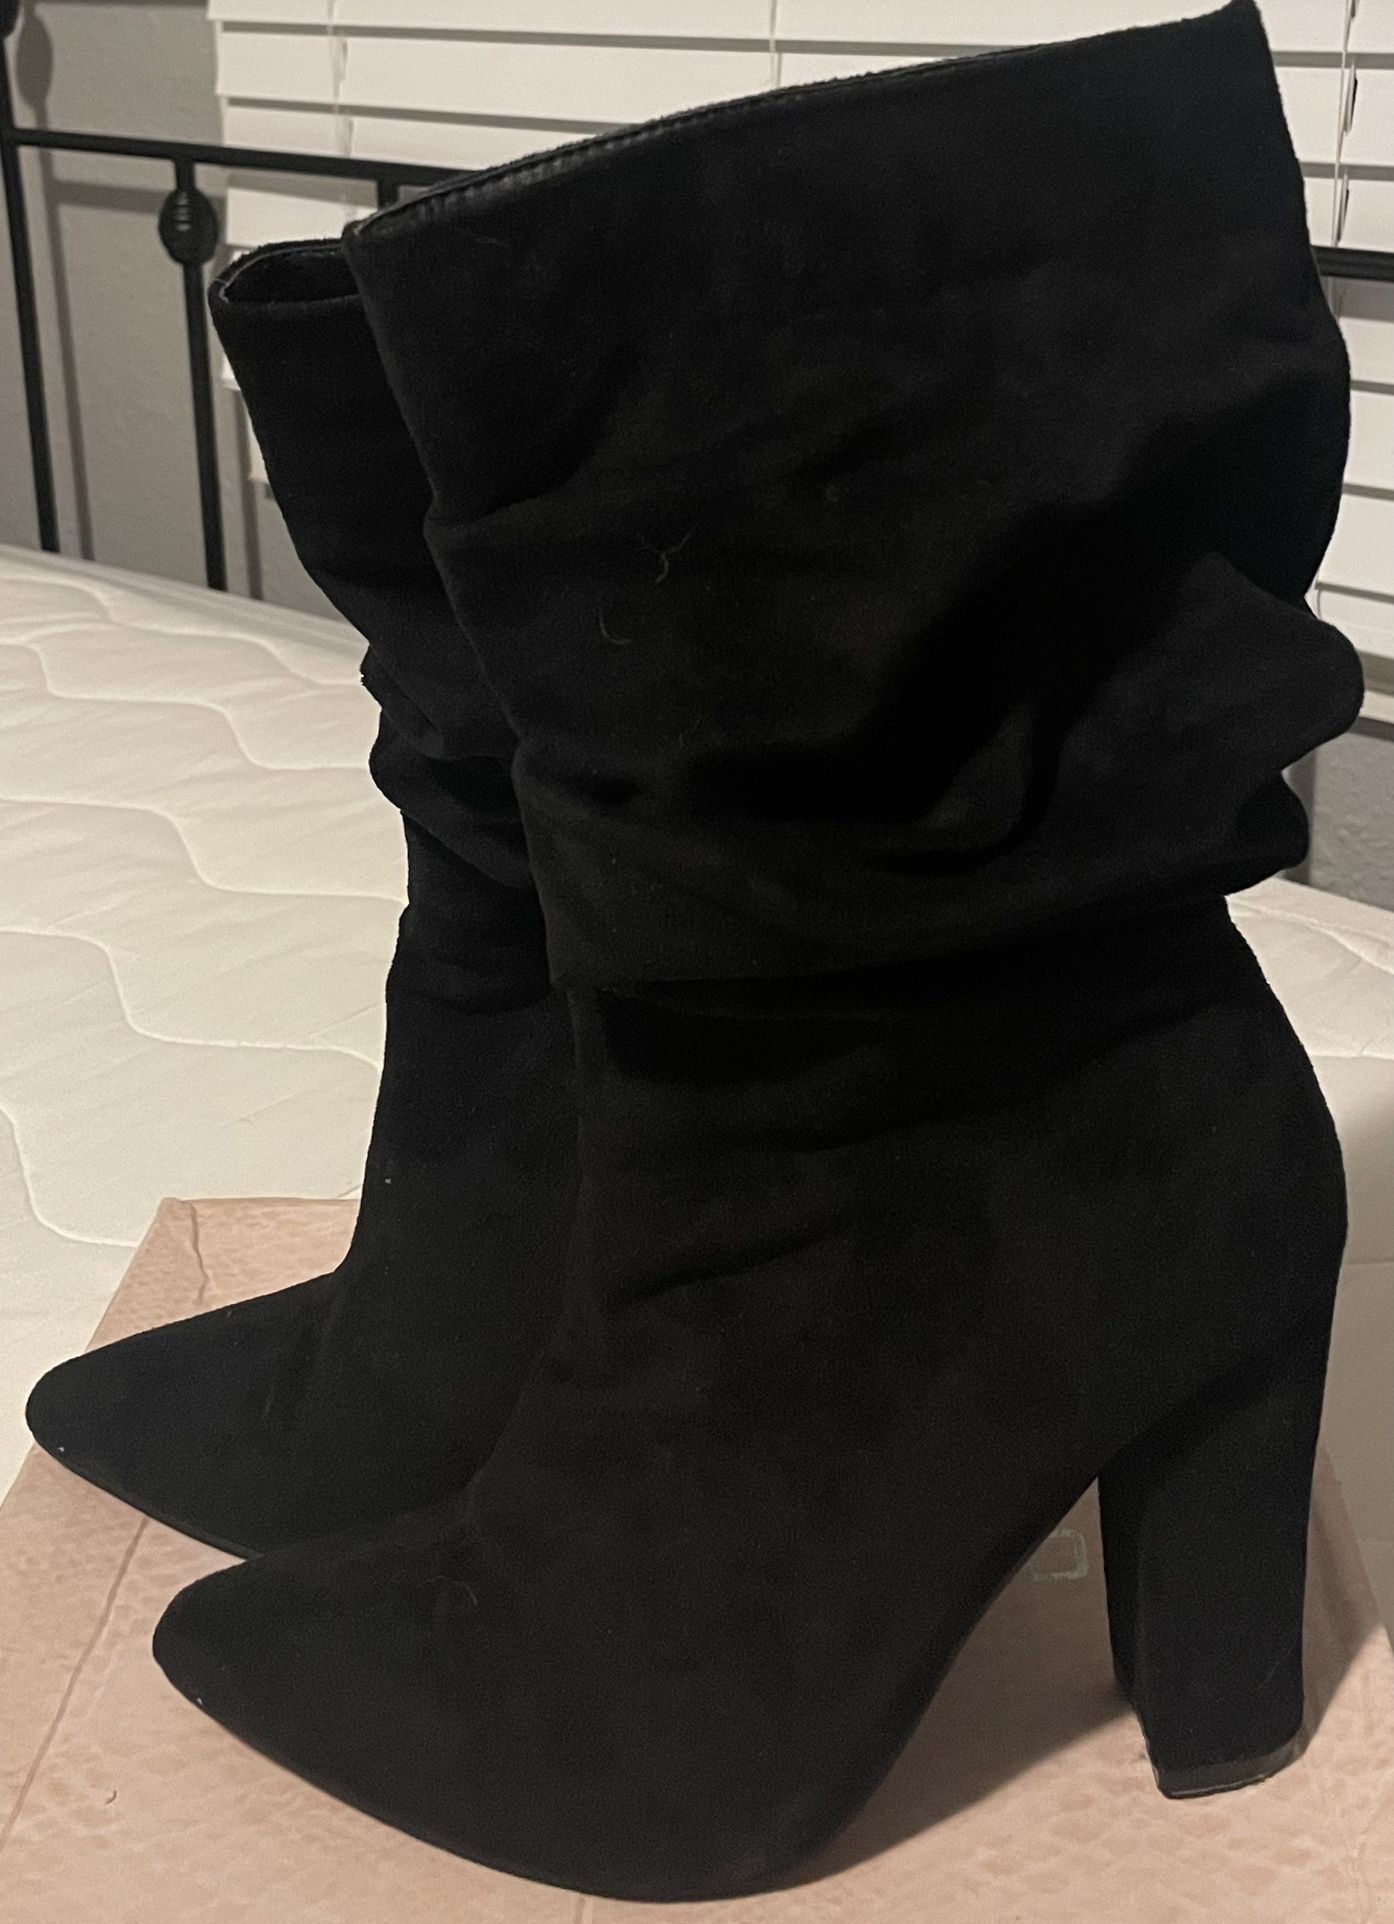 Women’s Forever 21 Black Suede Mid Calf Boot! Size 7.5